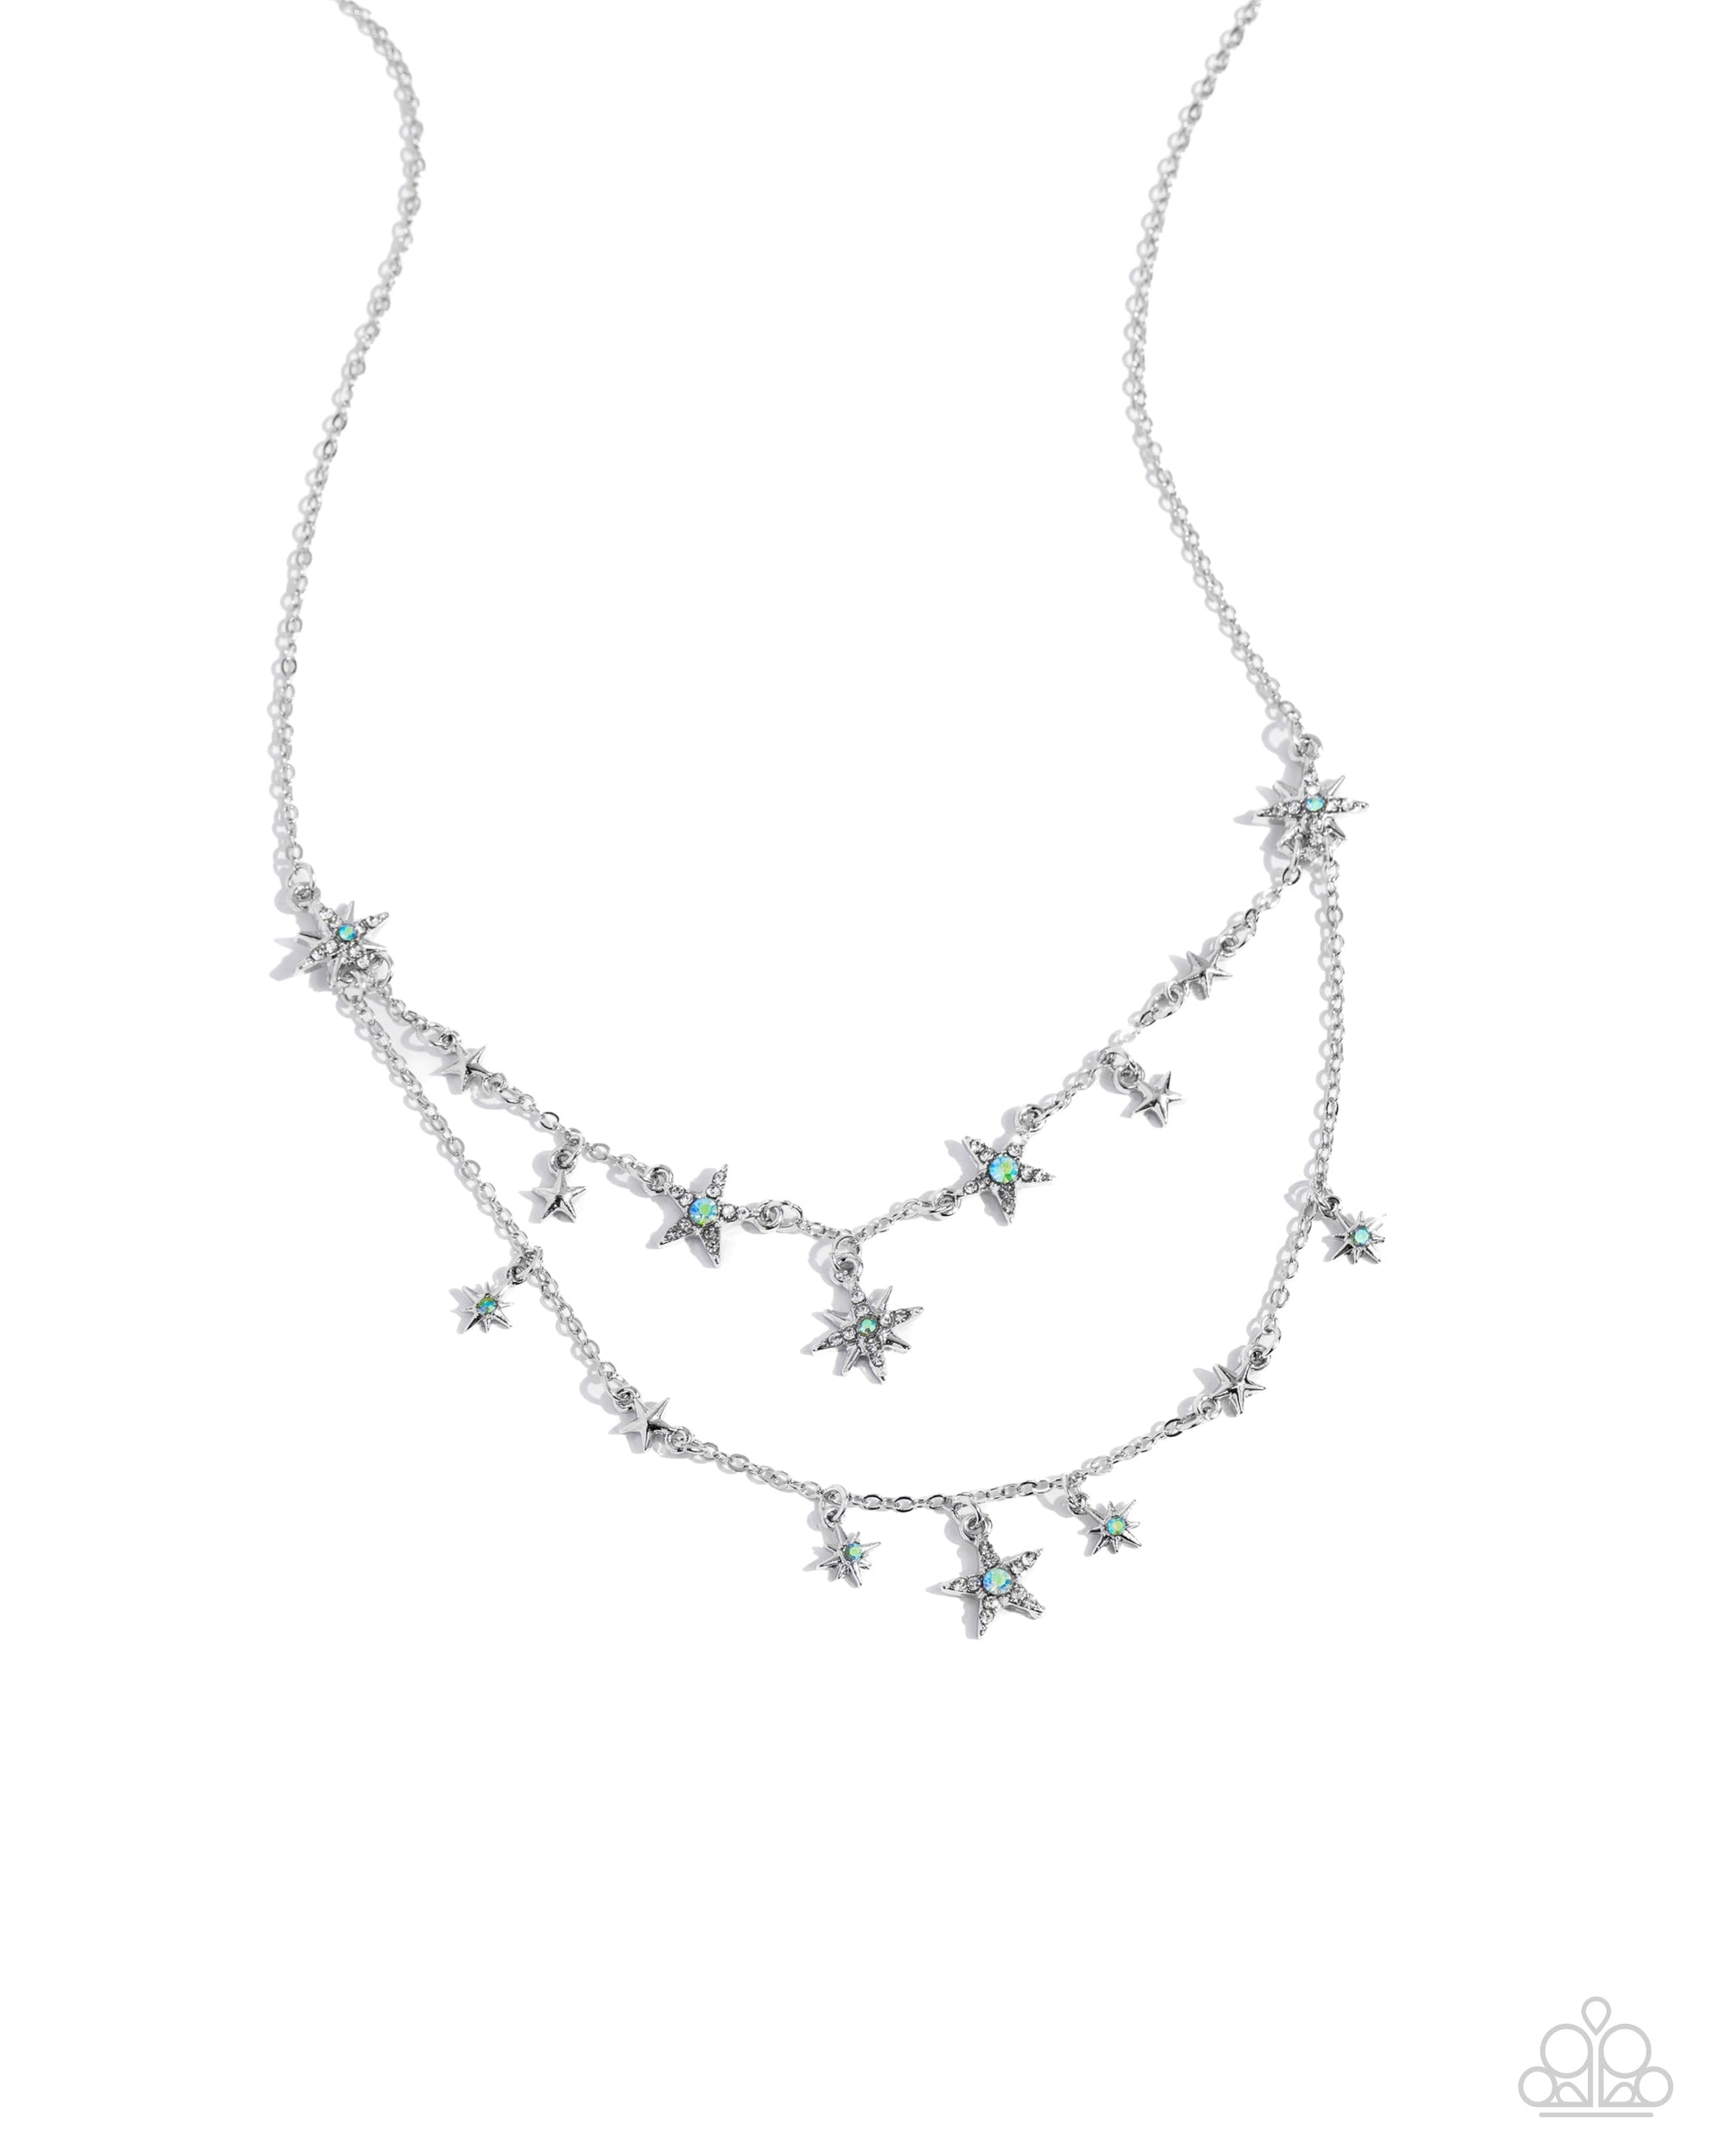 Raising the STAR Green Necklace - Paparazzi Accessories- lightbox - CarasShop.com - $5 Jewelry by Cara Jewels